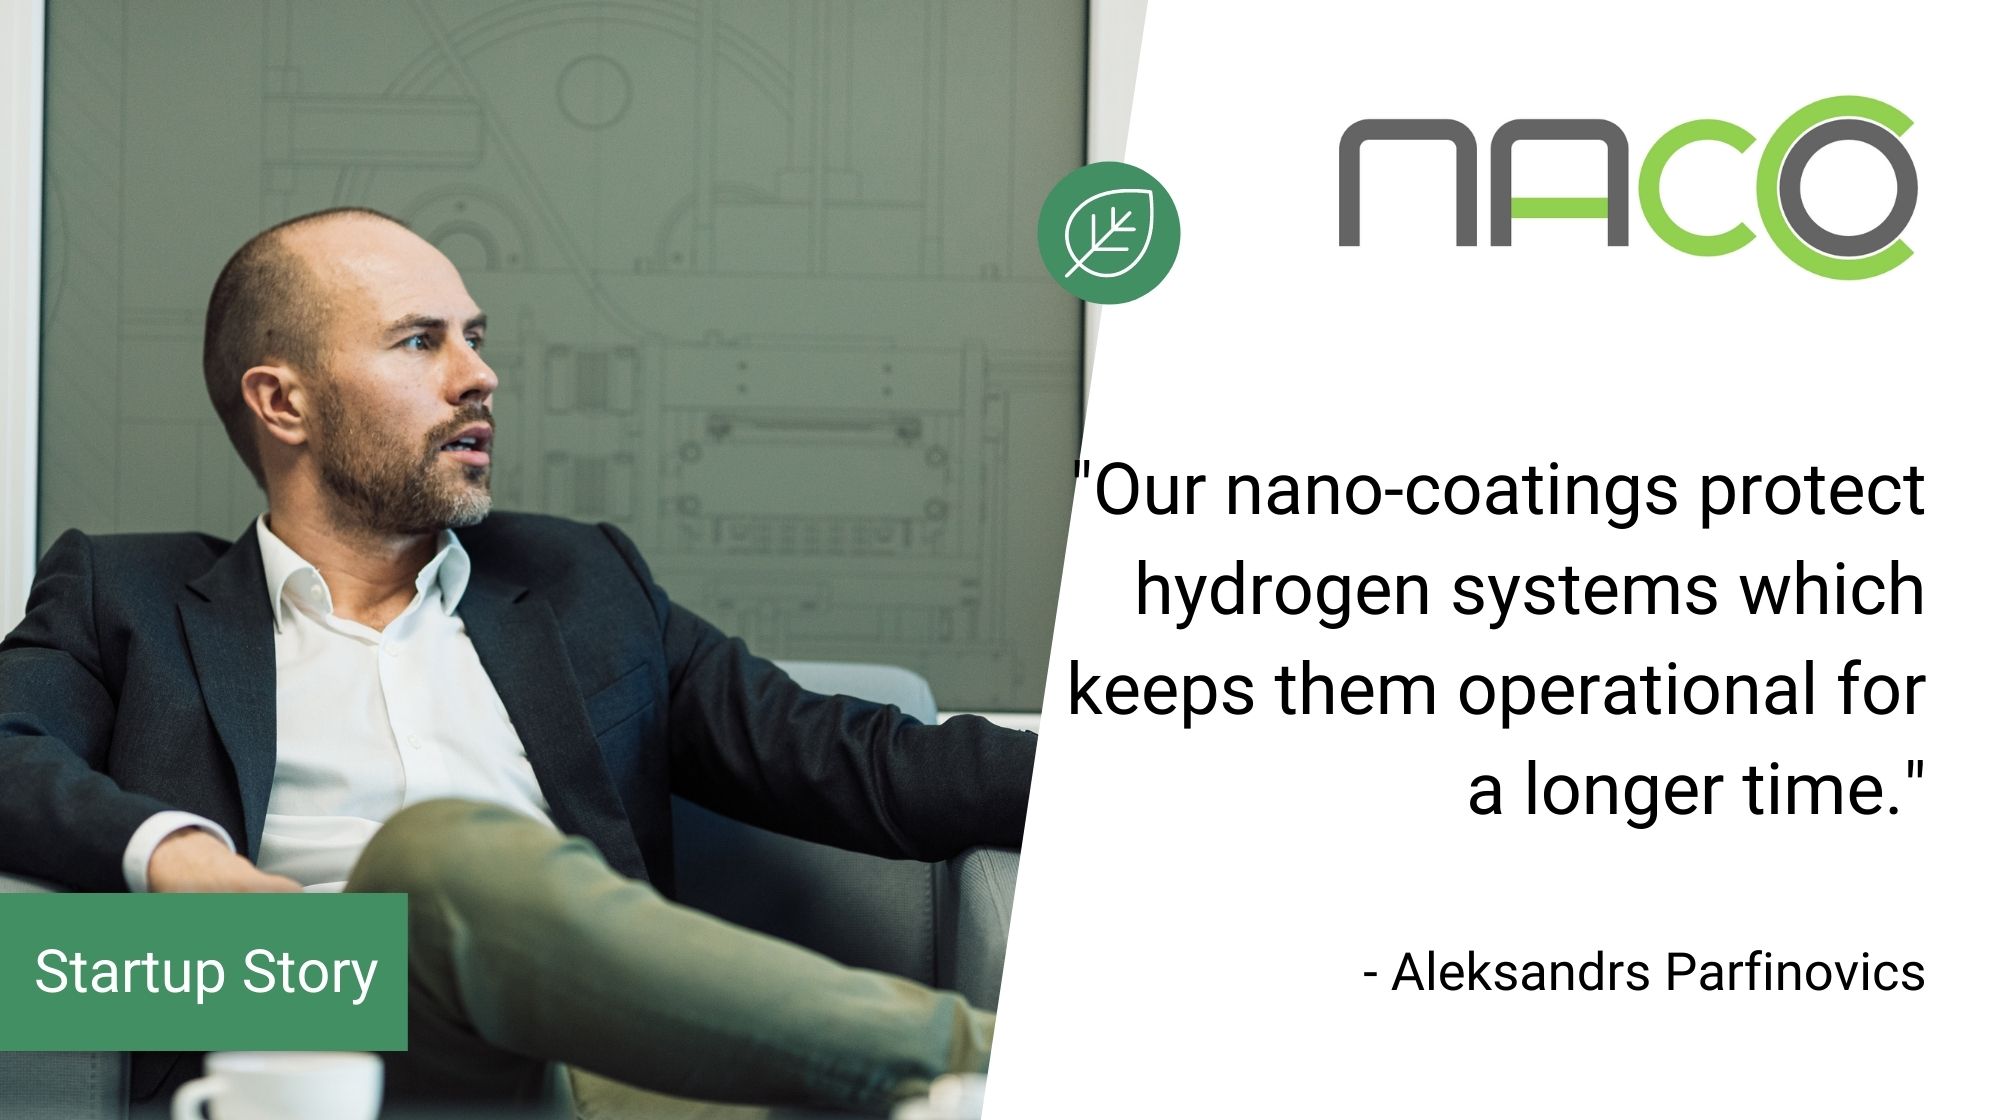 Accelerating the hydrogen revolution with nanocoatings